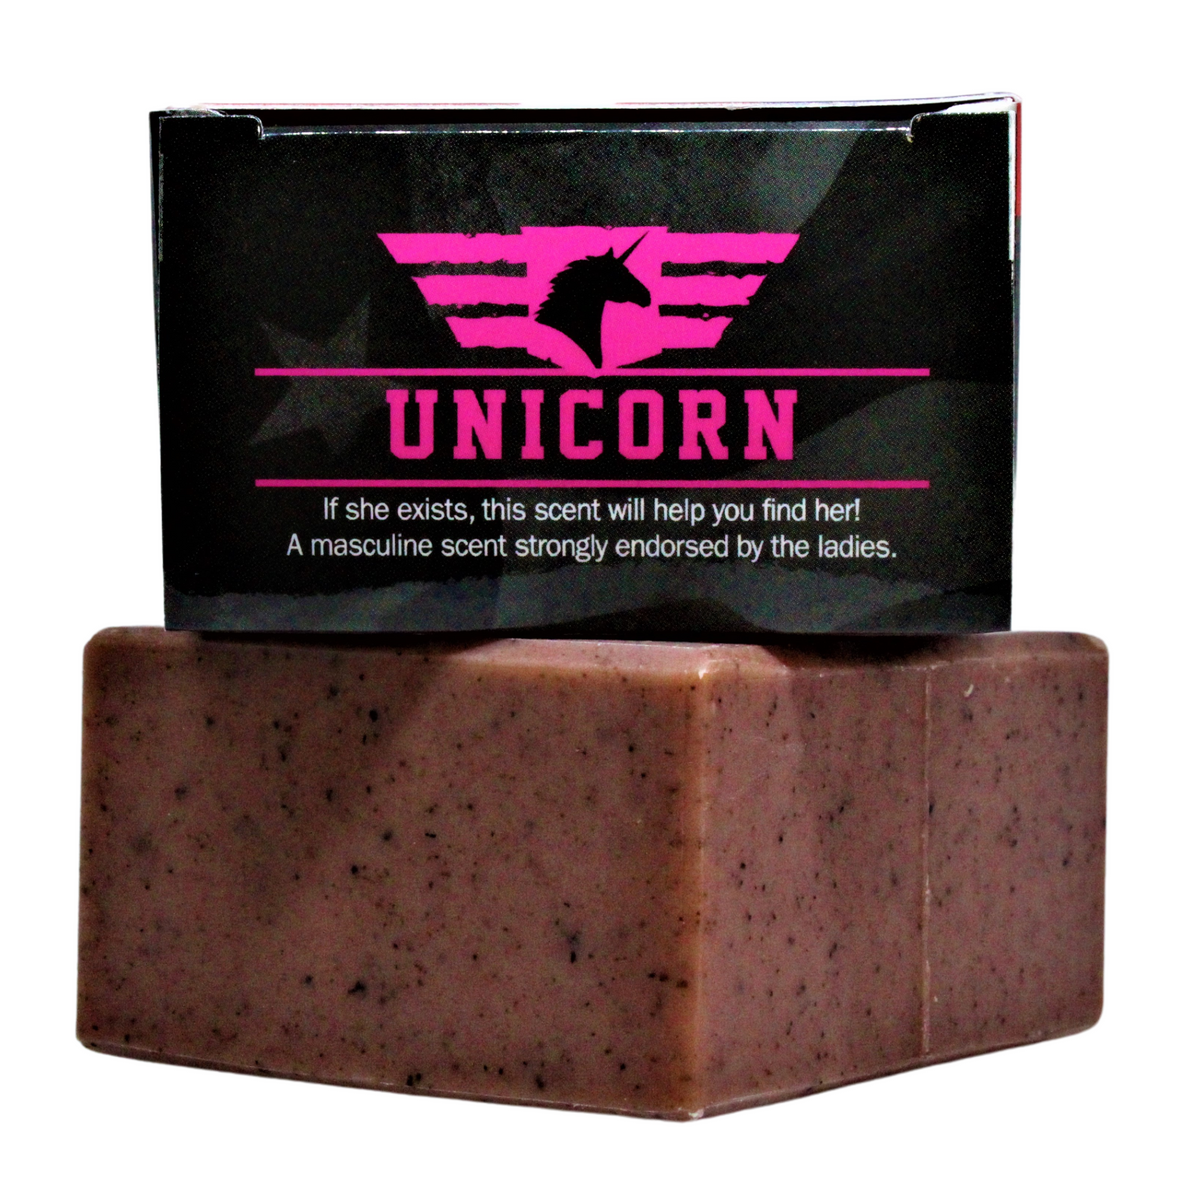 https://cdn.shopify.com/s/files/1/0092/8478/0068/products/PatriotandCompanyNaturalSoapUnicorn.png?v=1669445006&width=1200